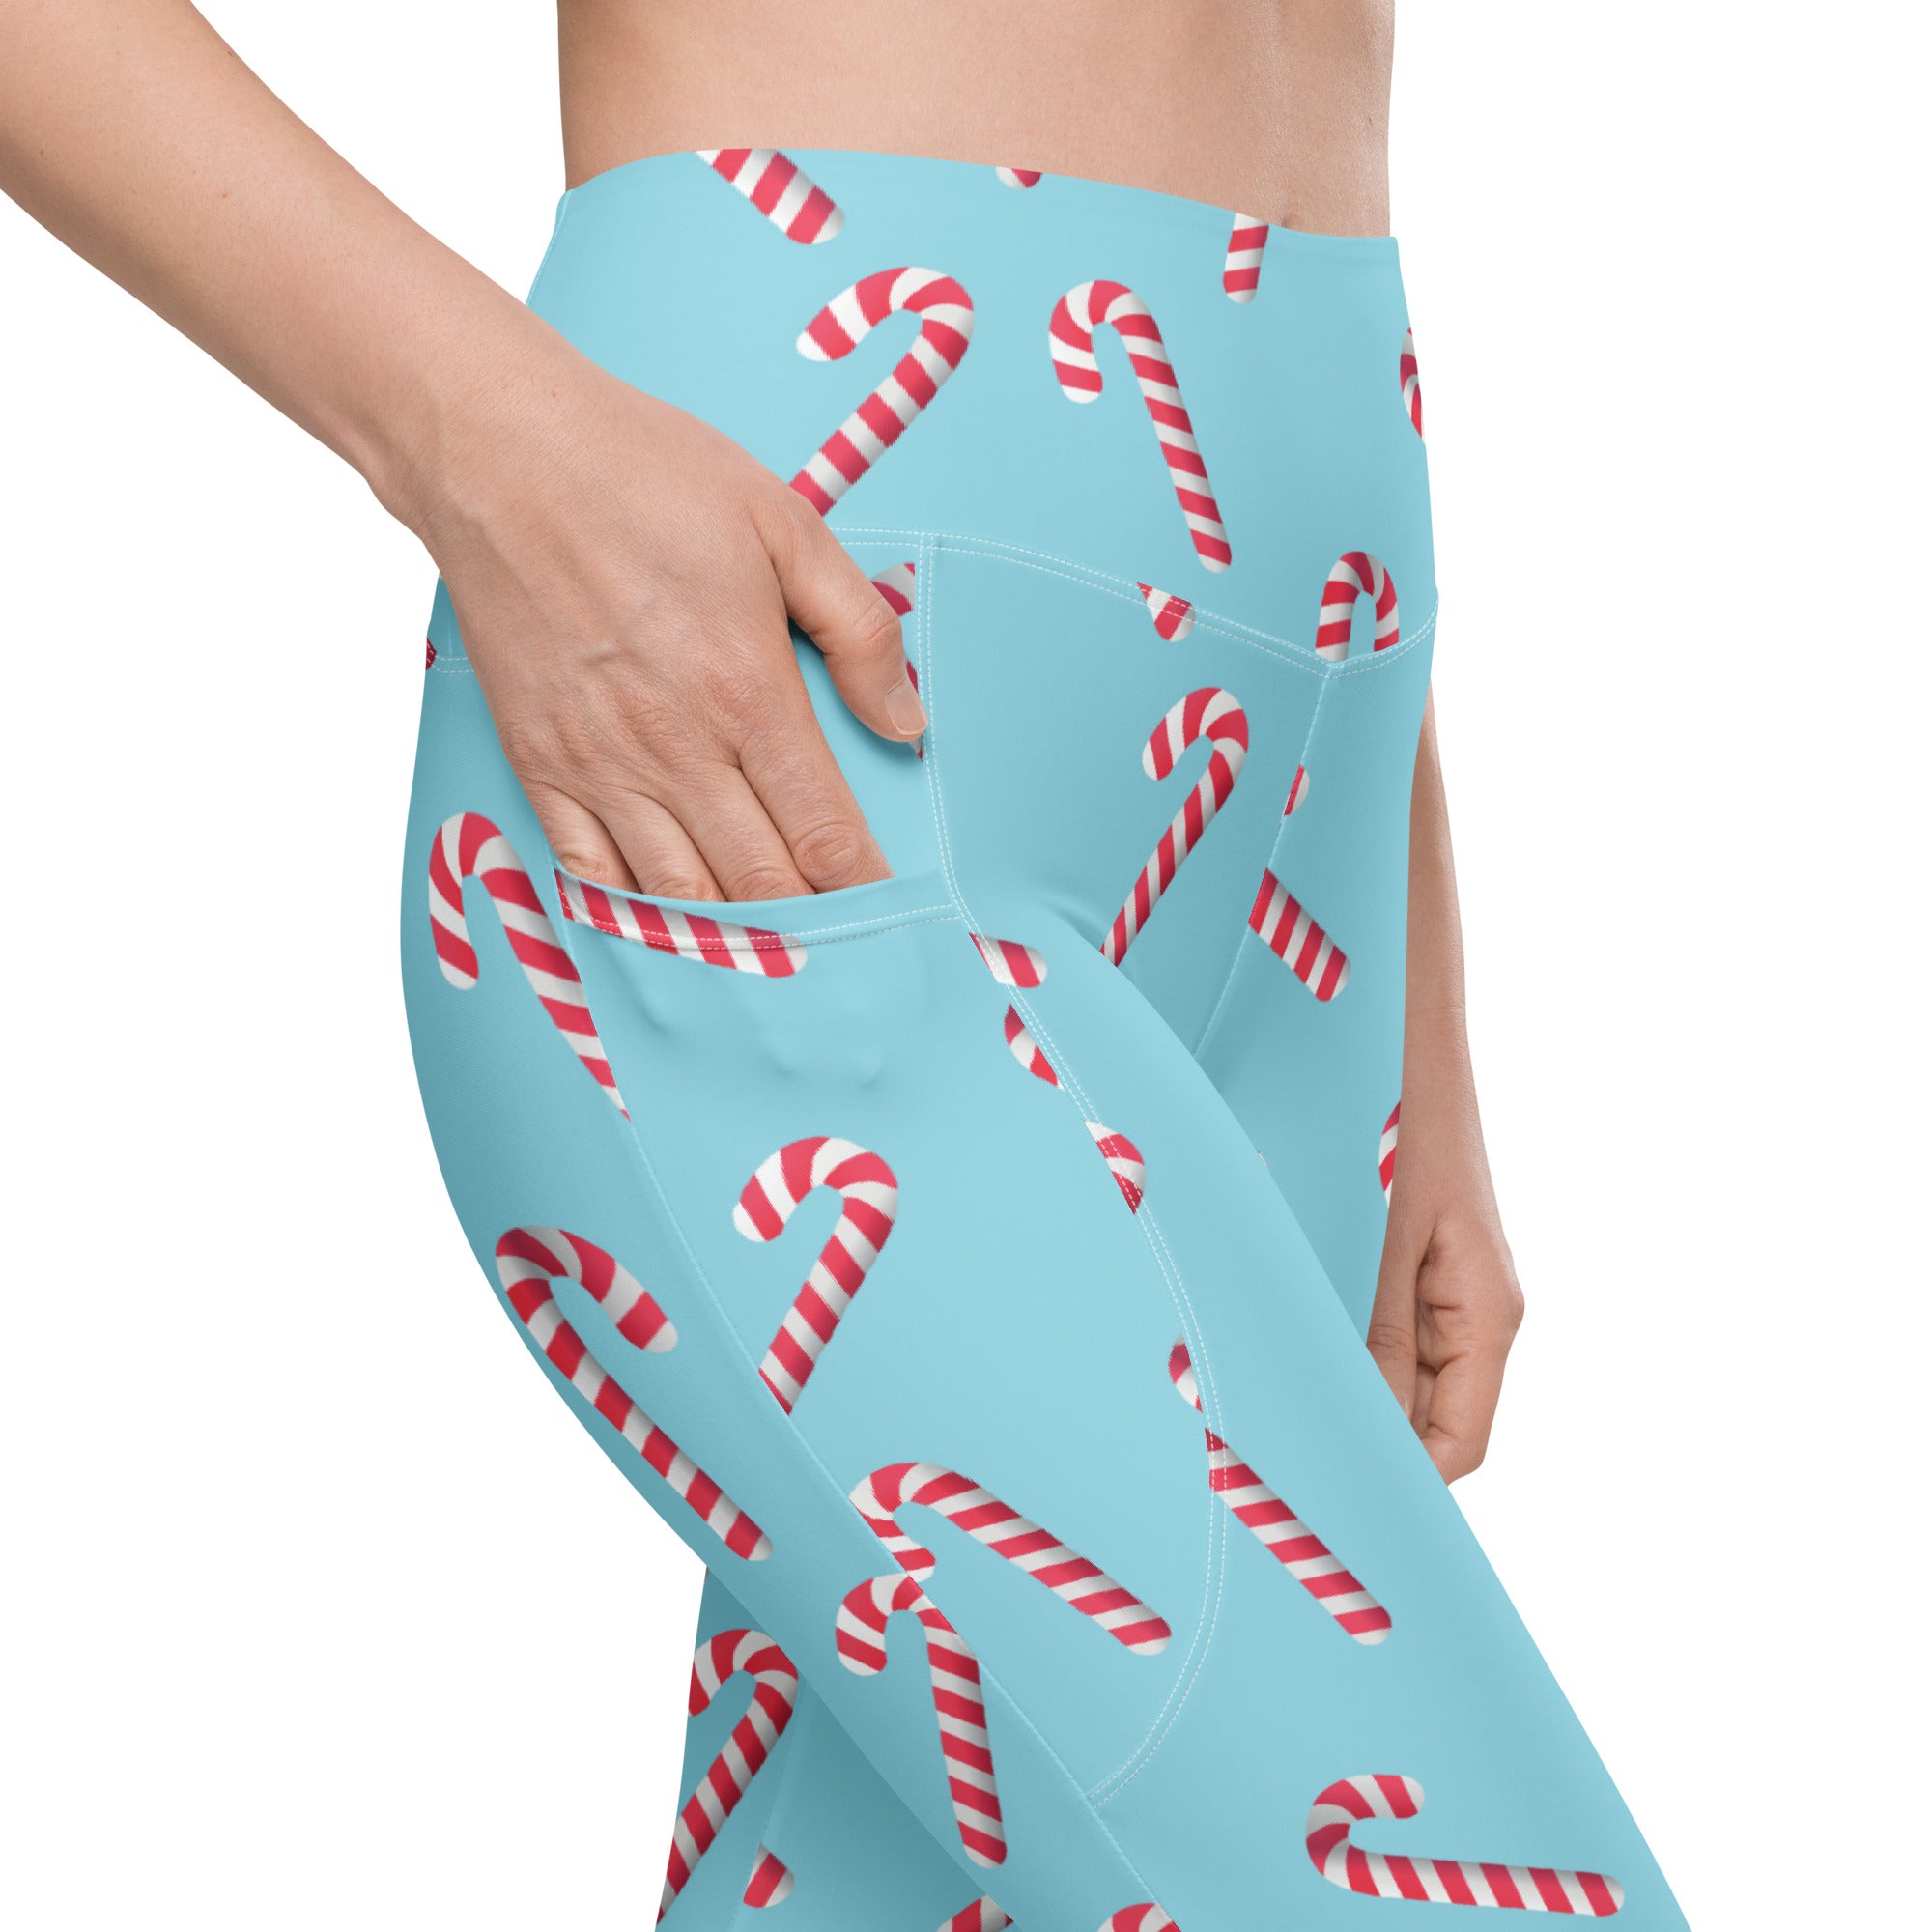 Candy Cane Print Leggings with Pockets